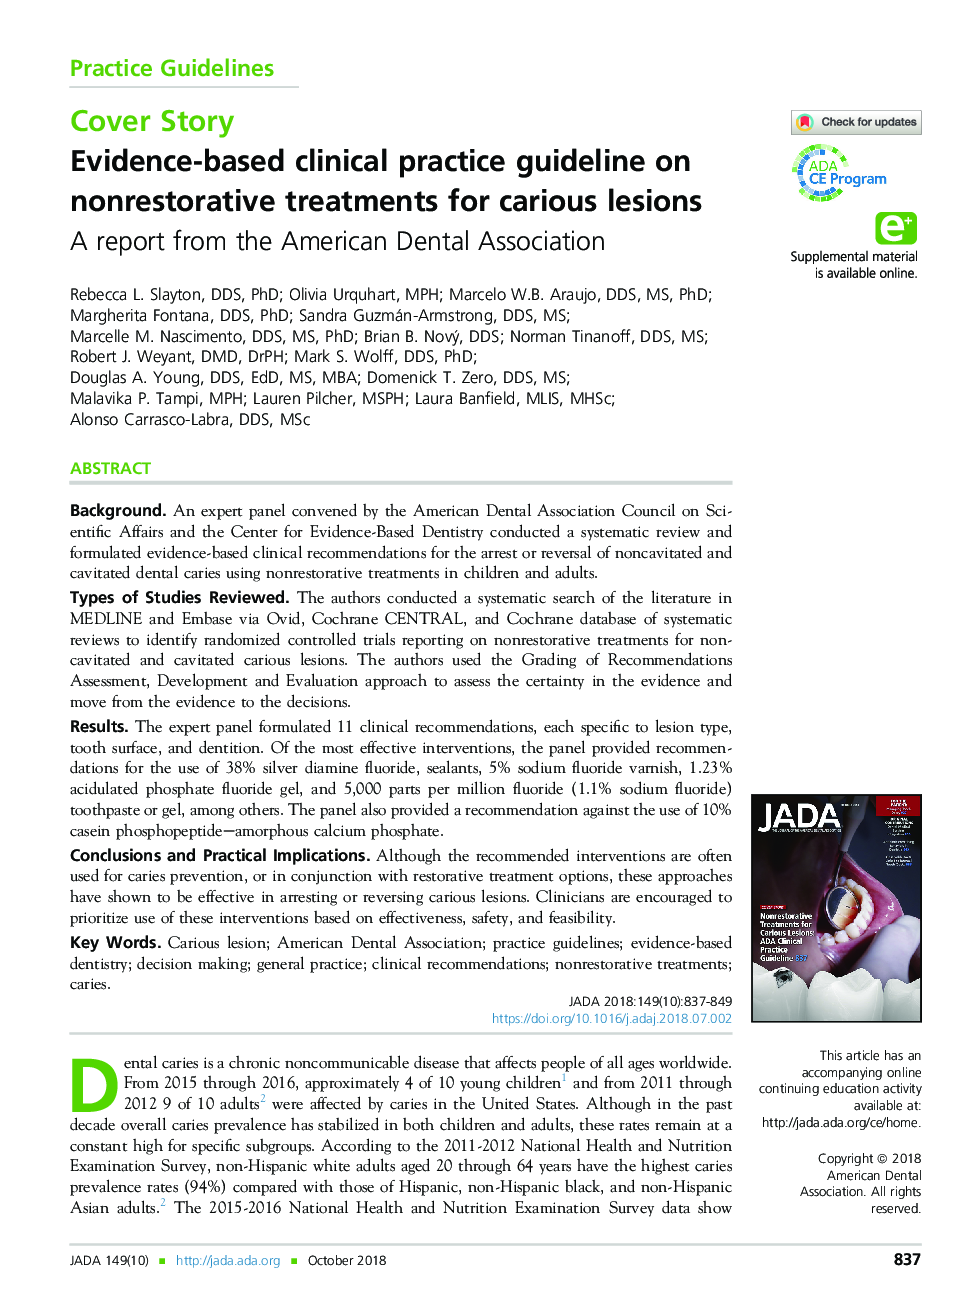 Evidence-based clinical practice guideline on nonrestorative treatments for carious lesions